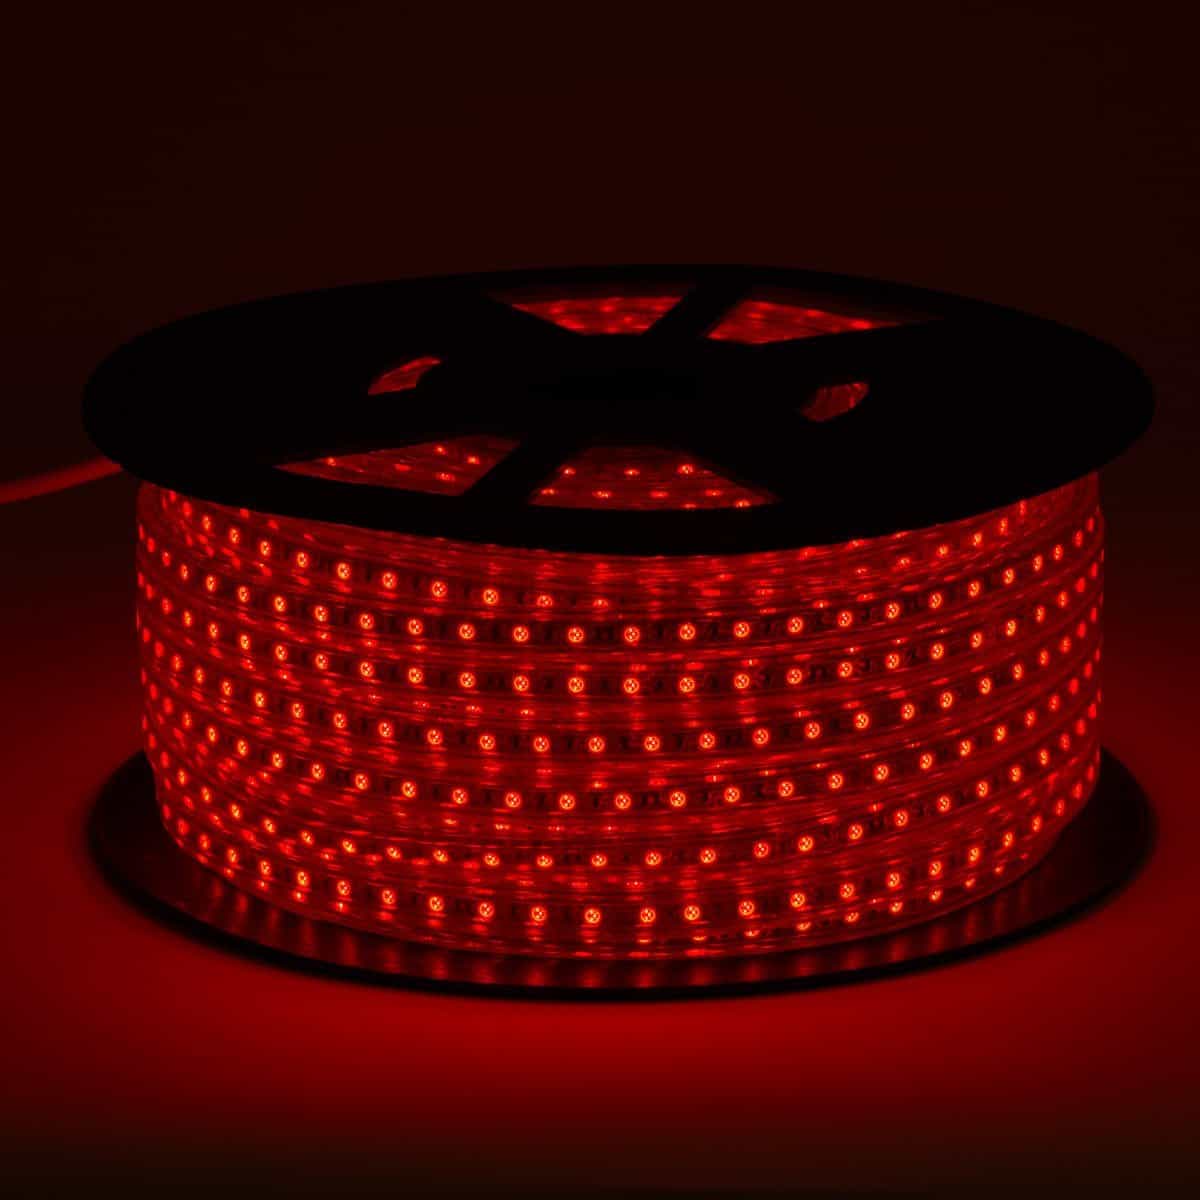 Load image into Gallery viewer, red led strip on black reel displaying vivid light in intense red color
